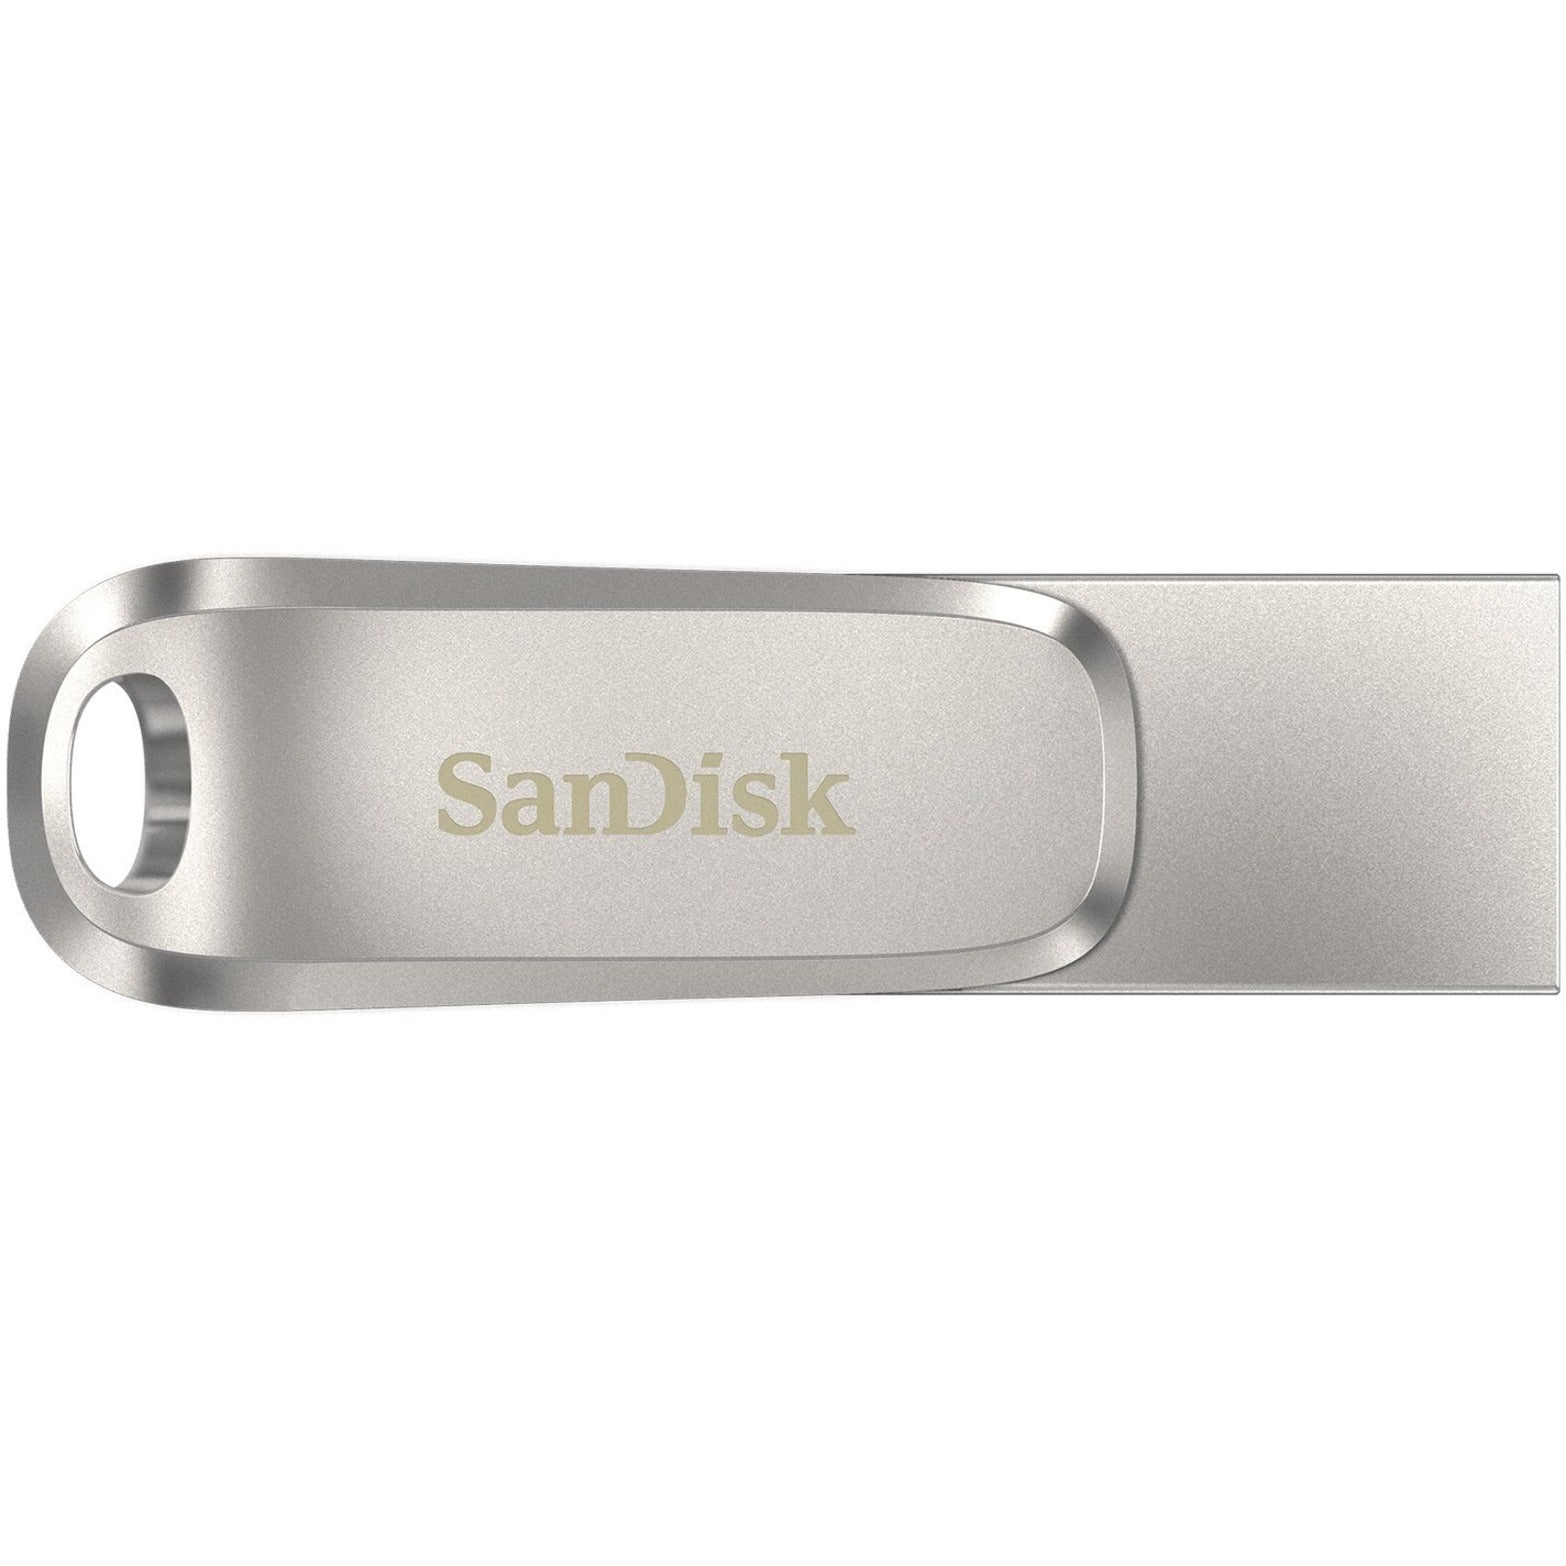 SanDisk SDDDC4-032G-A46 Ultra Dual Drive Luxe USB TYPE-C - 32GB, High-Speed Data Transfer and Storage